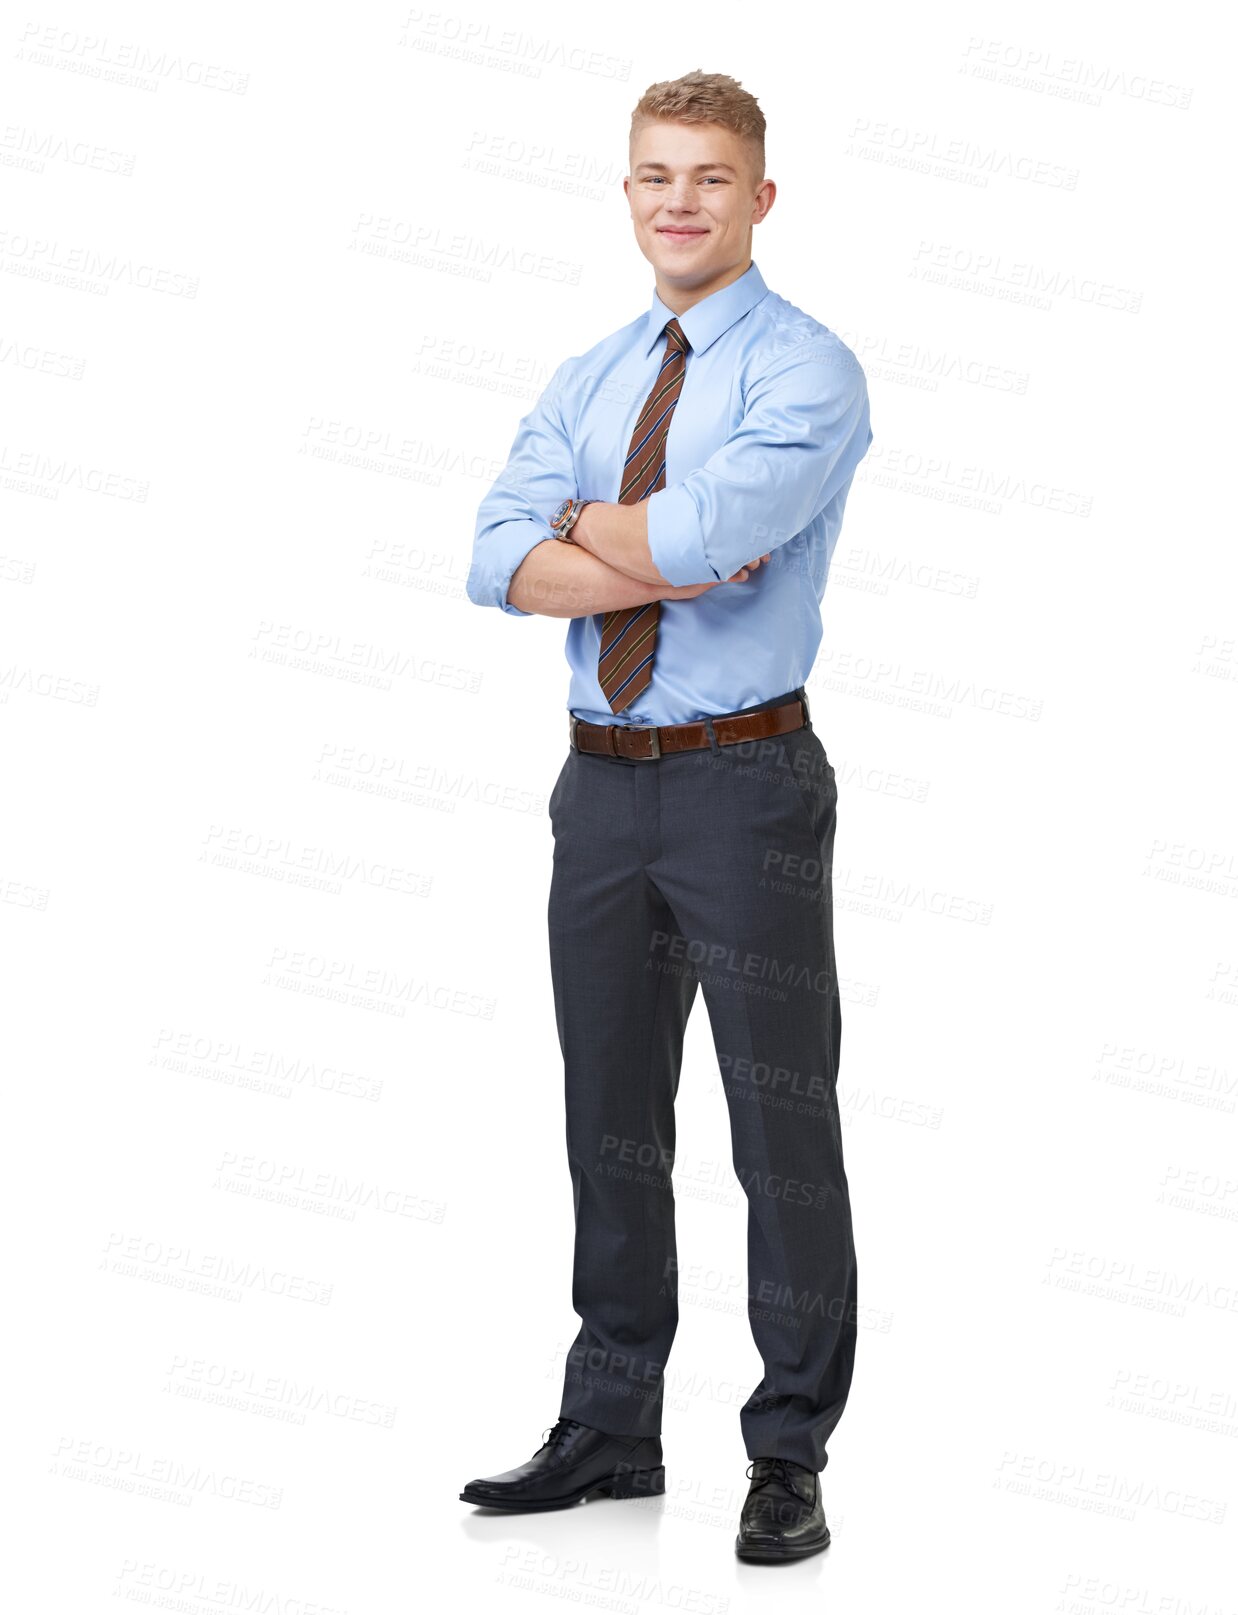 Buy stock photo Portrait, arms crossed and job opportunity with a business man isolated on a transparent background. Corporate, professional and ambition with a young male employee ready as a workplace intern on PNG